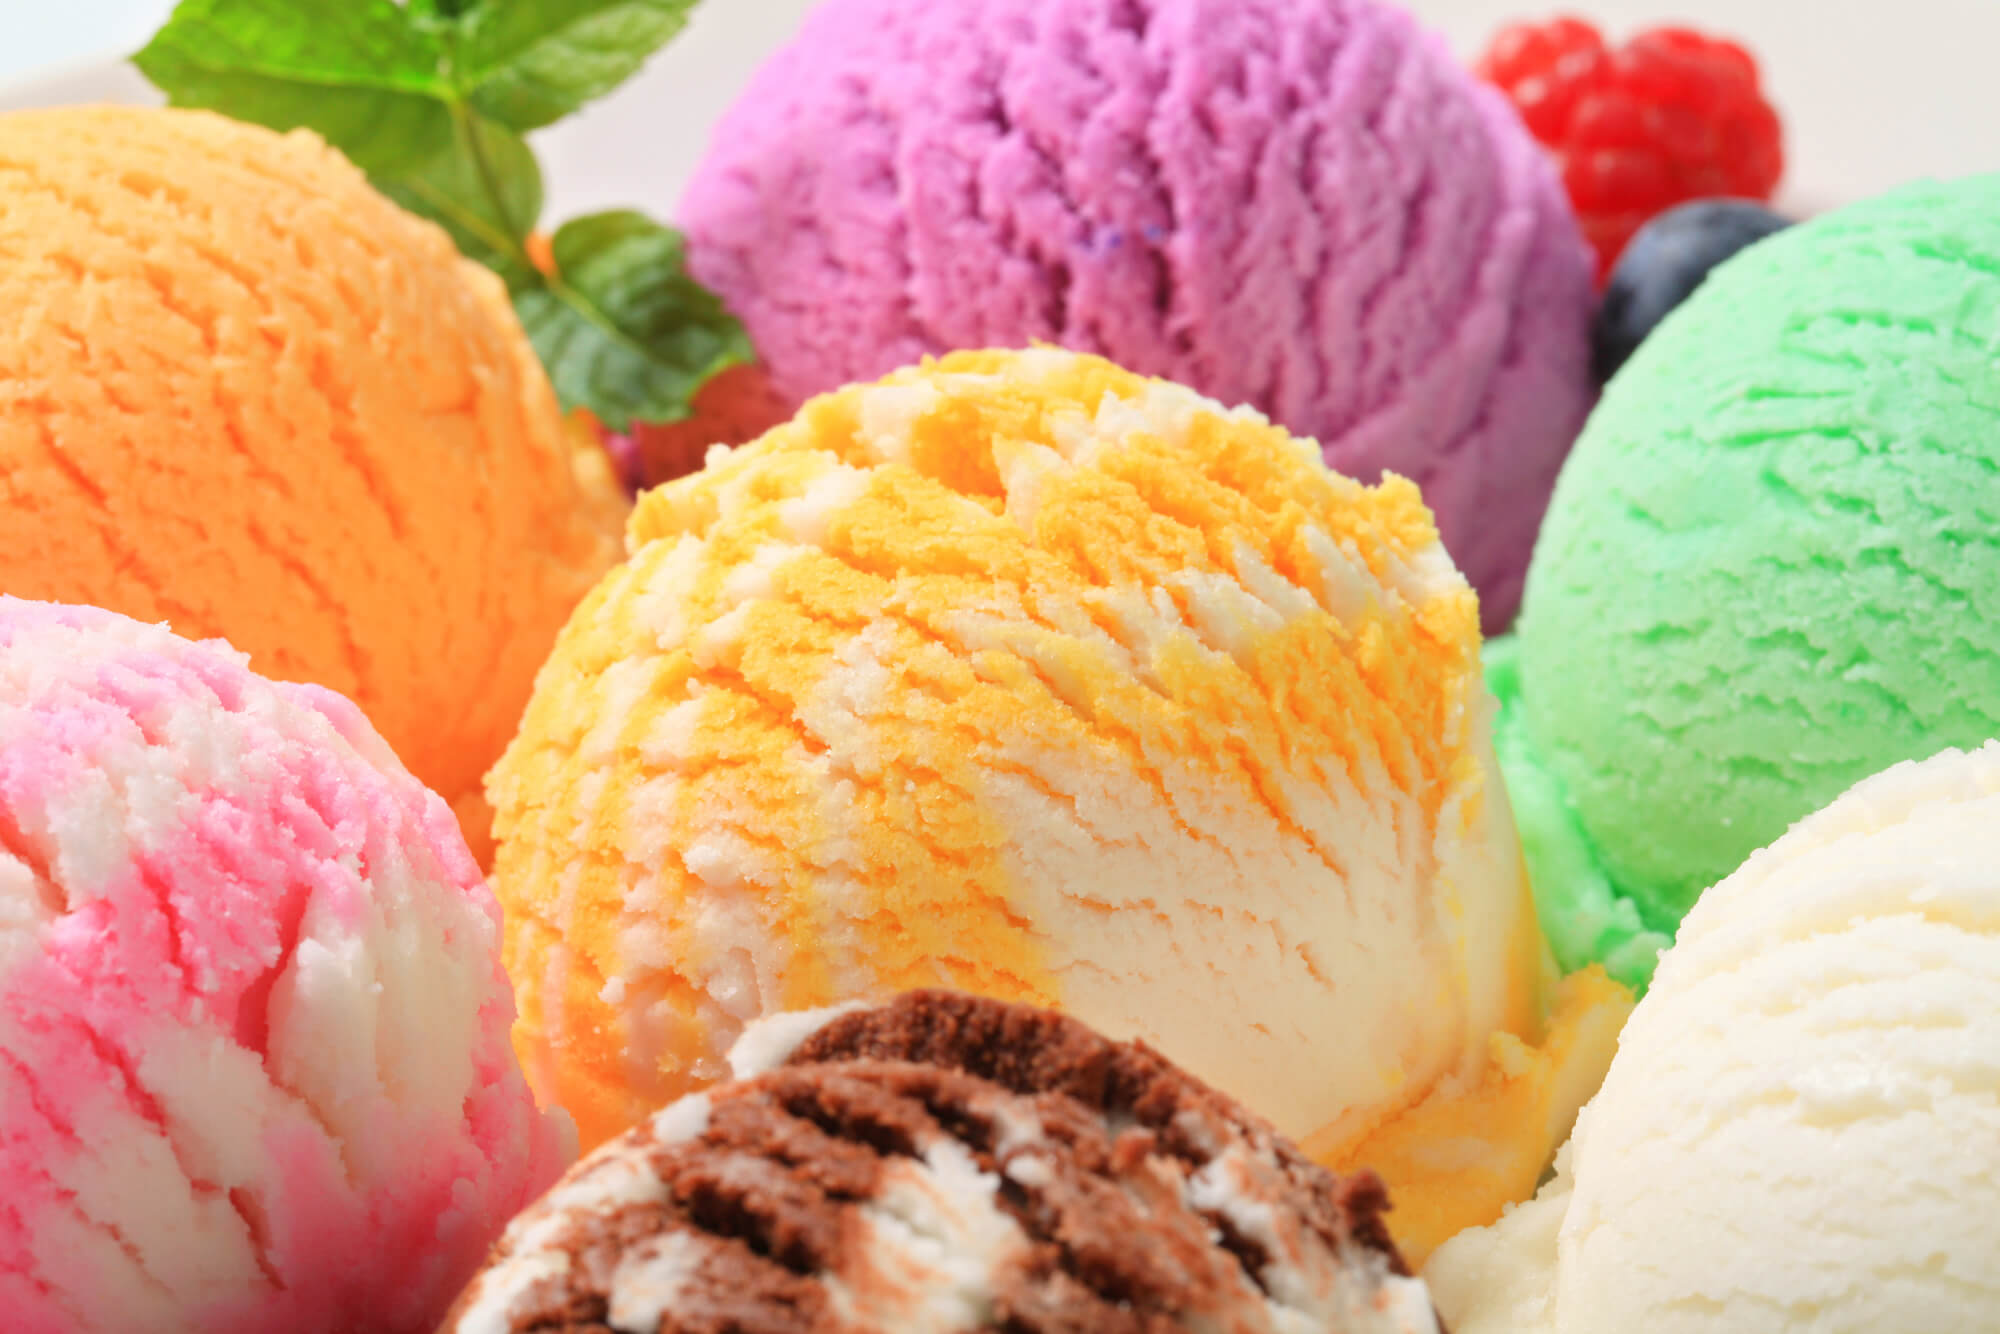 Strawberry Ice Cream Day 2022: Here's Why This Day is Celebrated